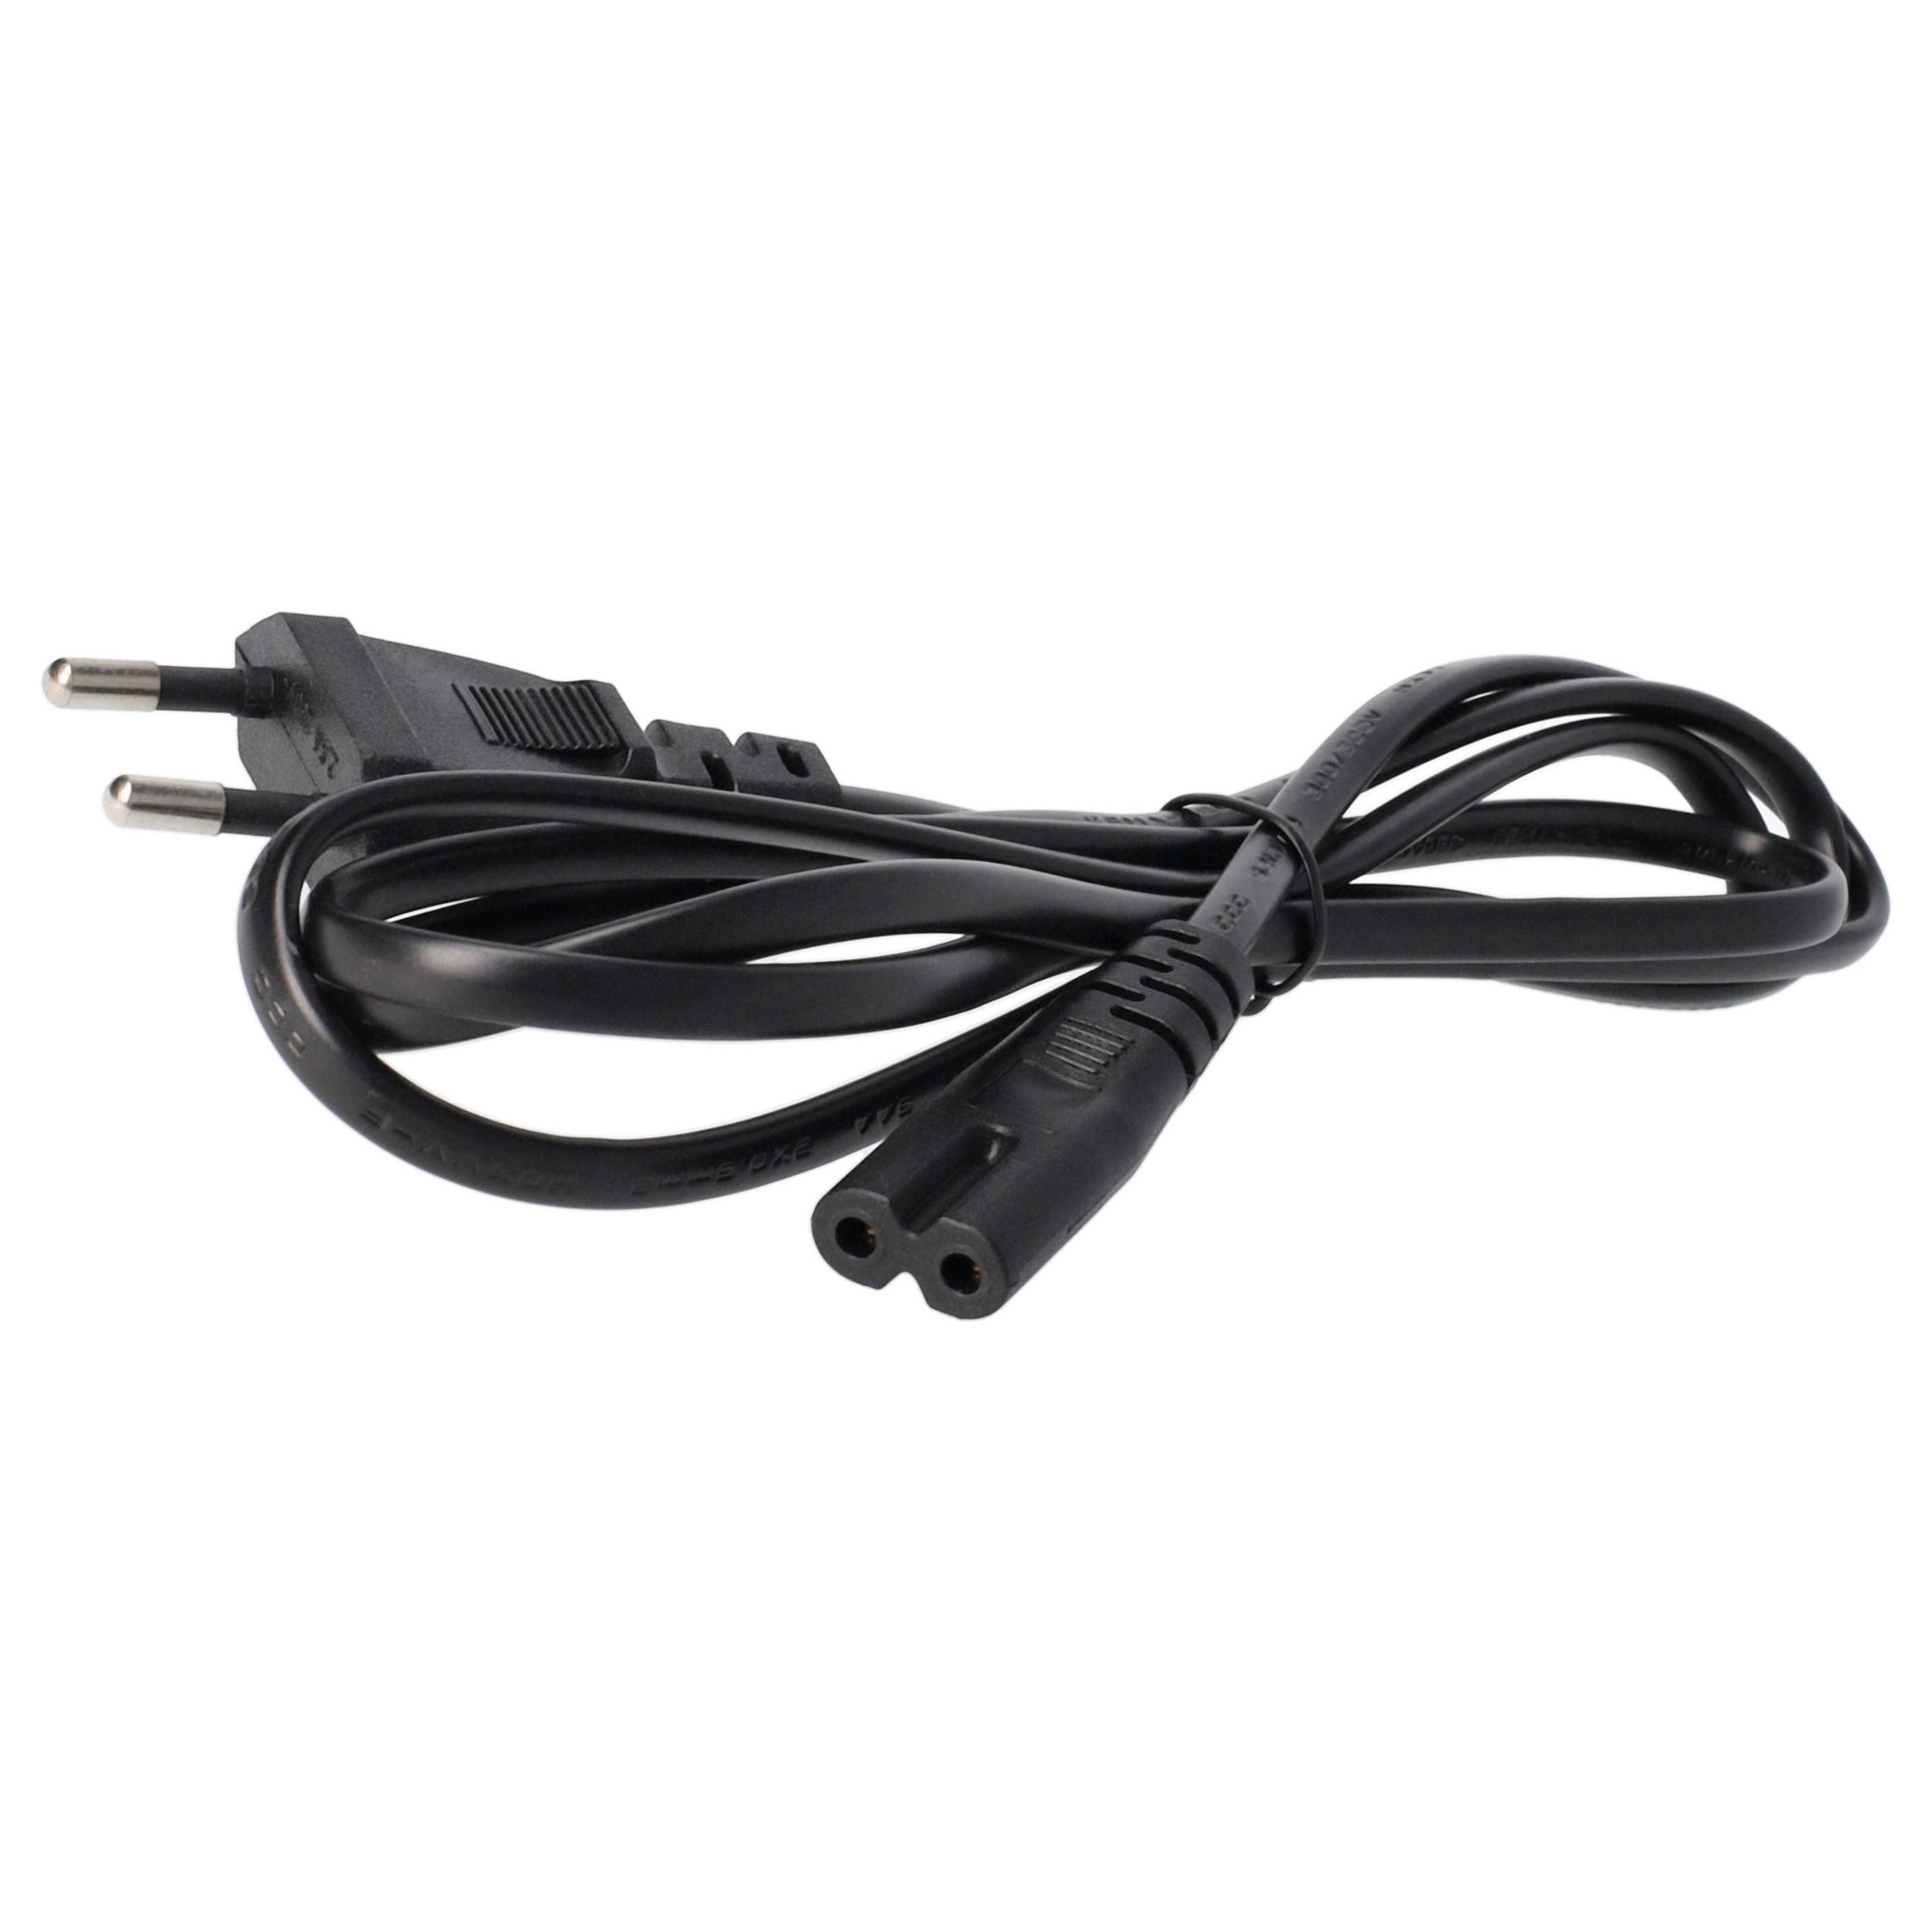 Mains Power Adapter replaces HP 101898-001, 101880-001, 120765-001, 159224-001, 146594-001 forNotebook, 65 W